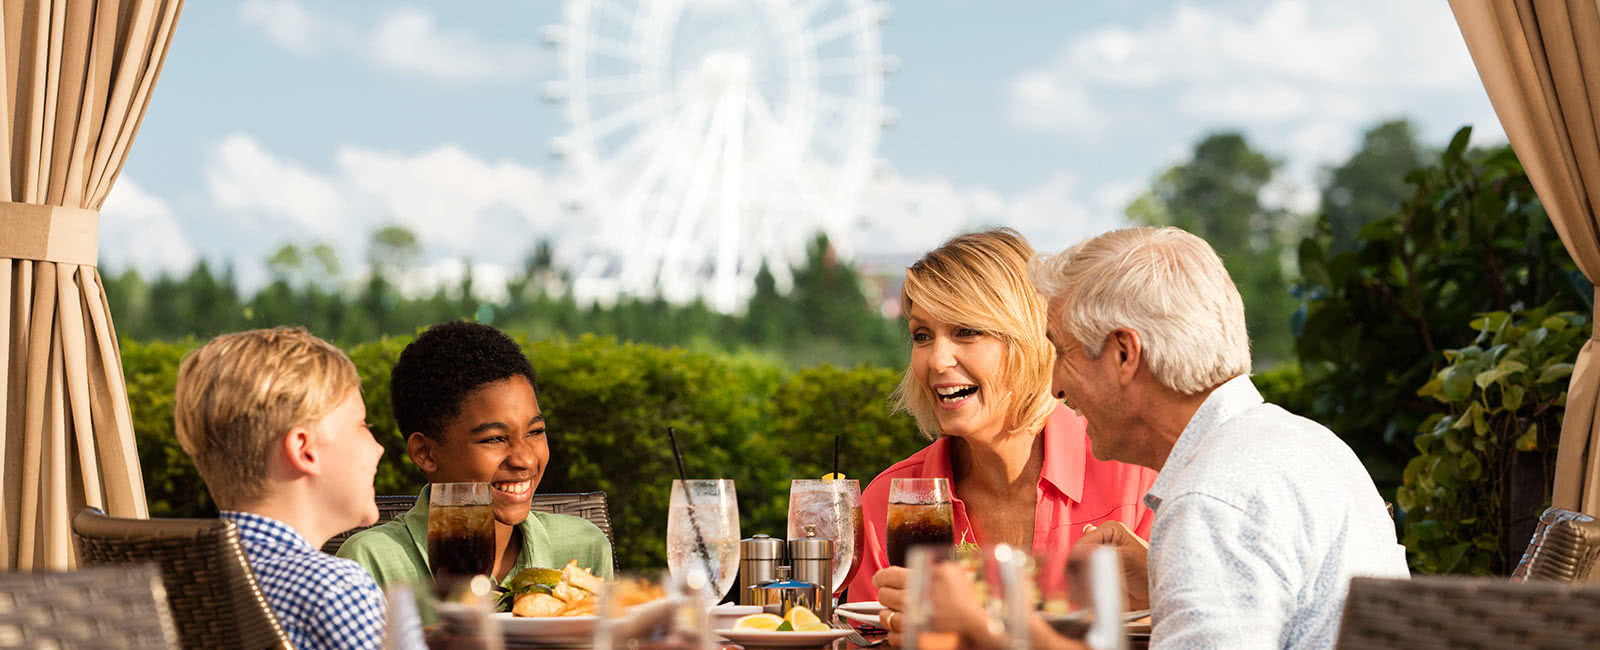 Enjoy a family vacation near Orlando's most popular attractions with Hilton Grand Vacations